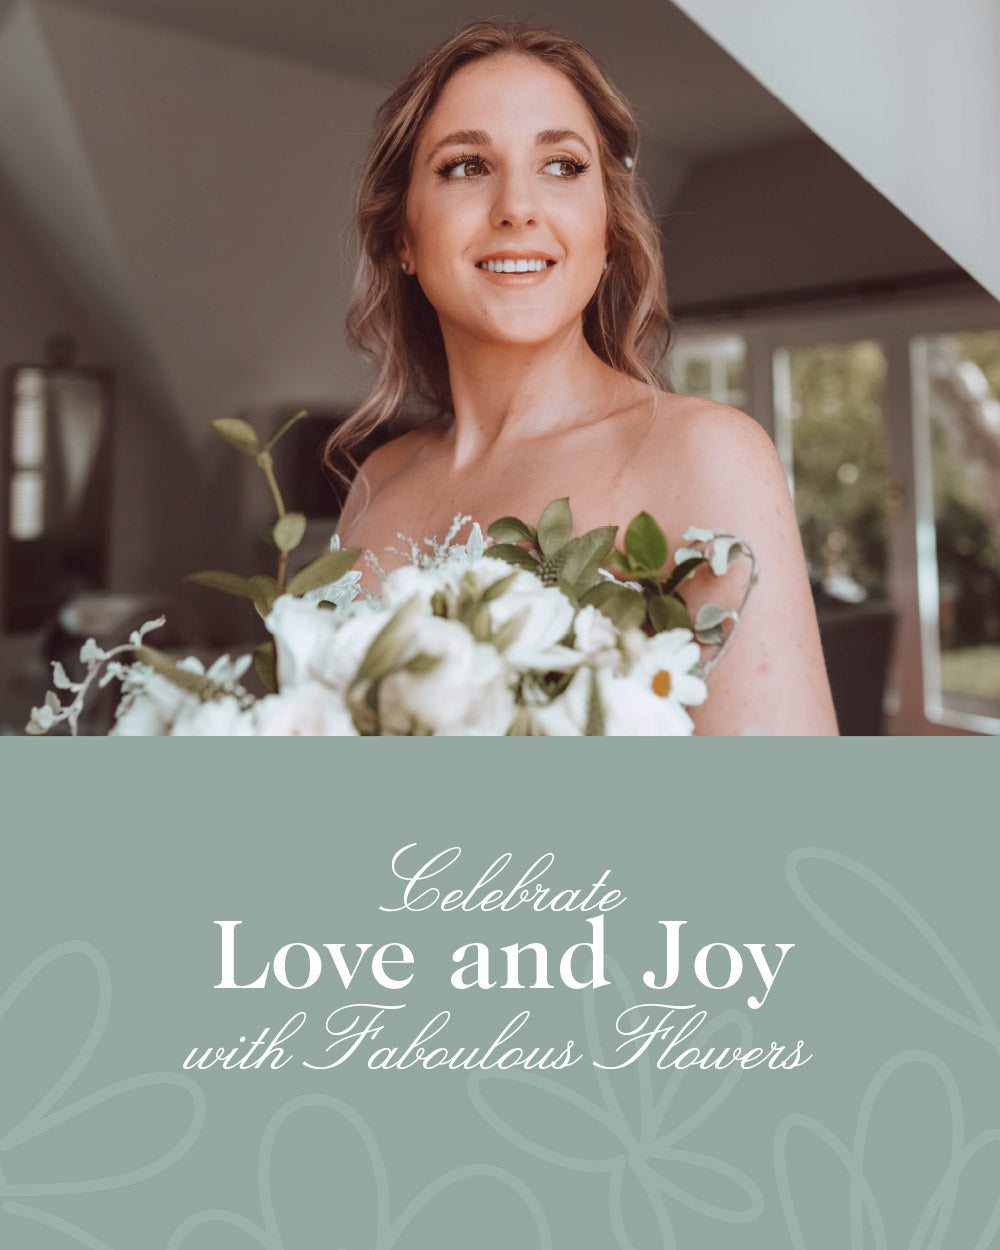 A beautiful bride smiling and holding a lush bouquet of white flowers with the text 'Celebrate Love and Joy with Fabulous Flowers' overlayed. Weddings at Fabulous Flowers and Gifts.